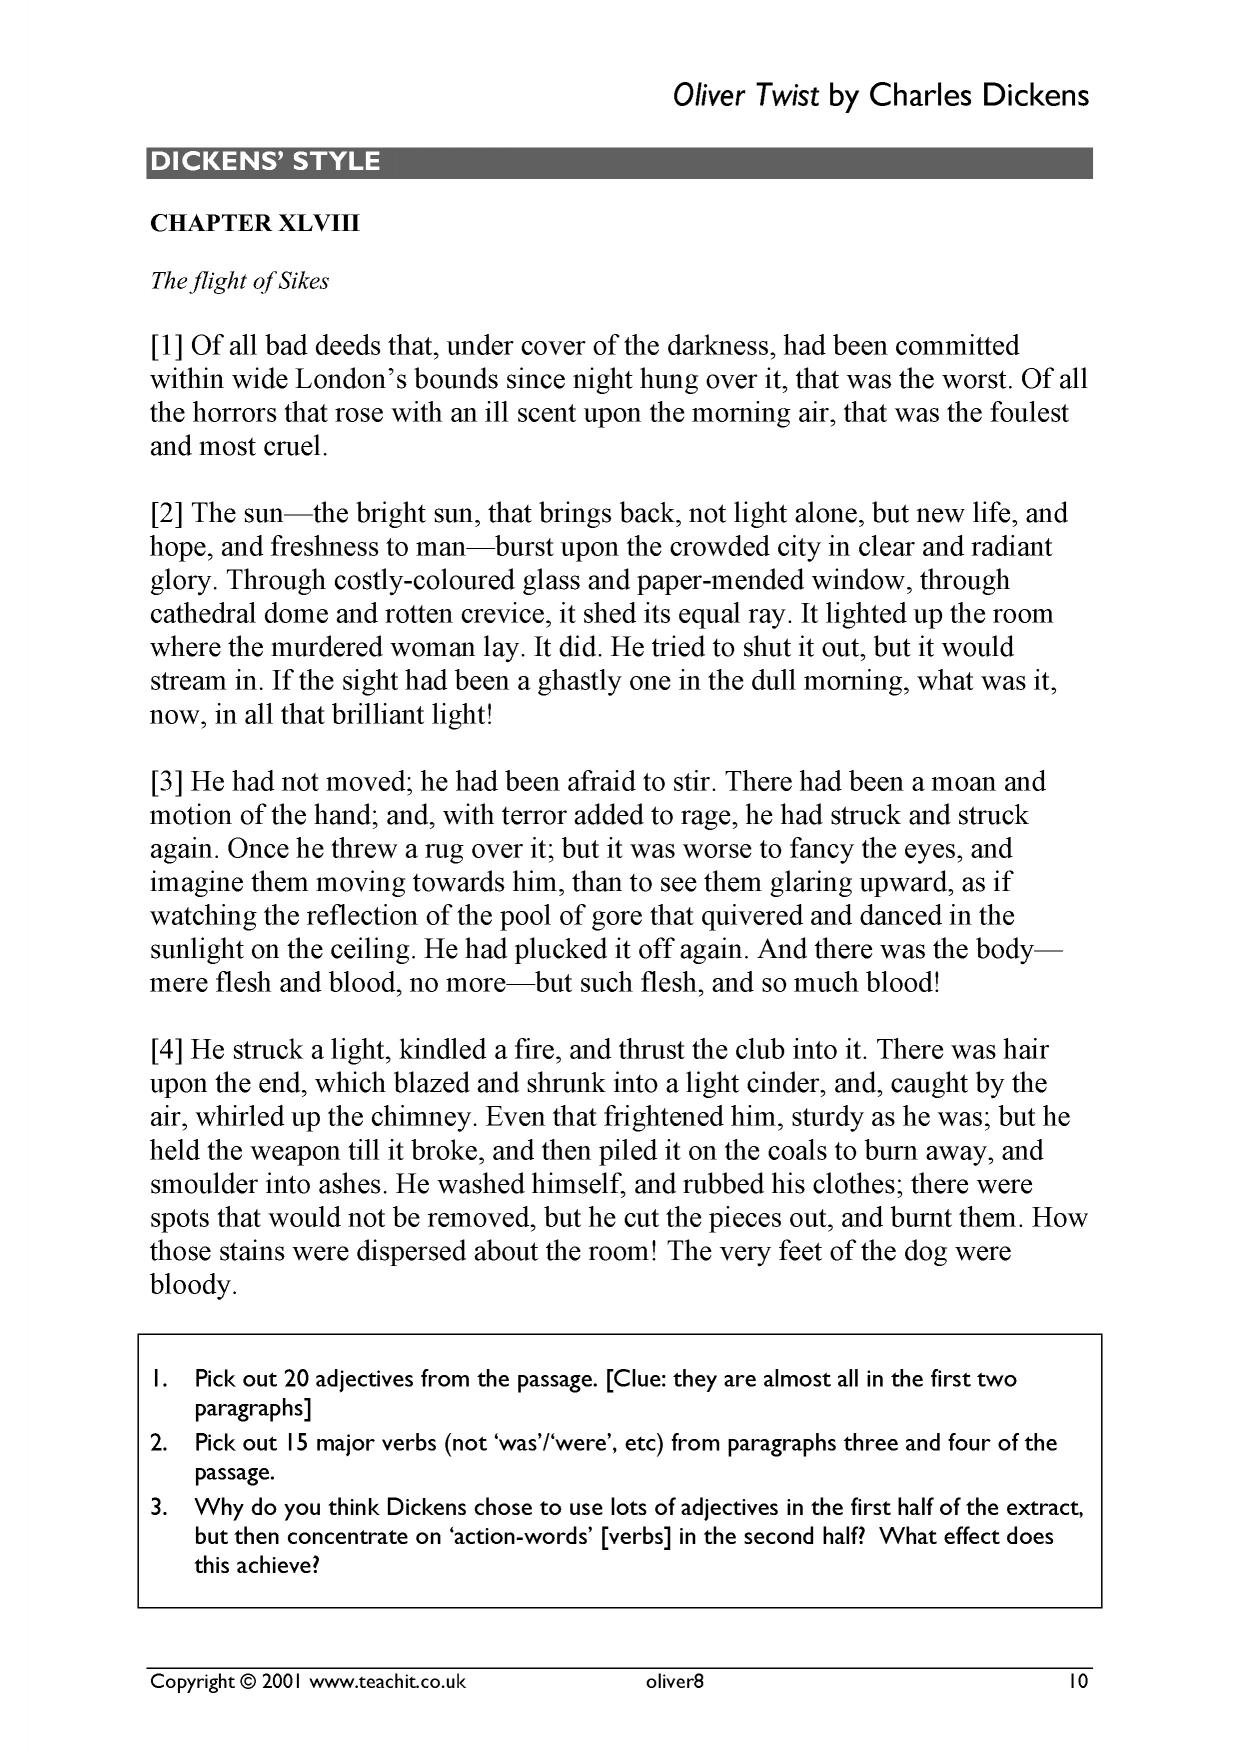 Oliver twist essay questions